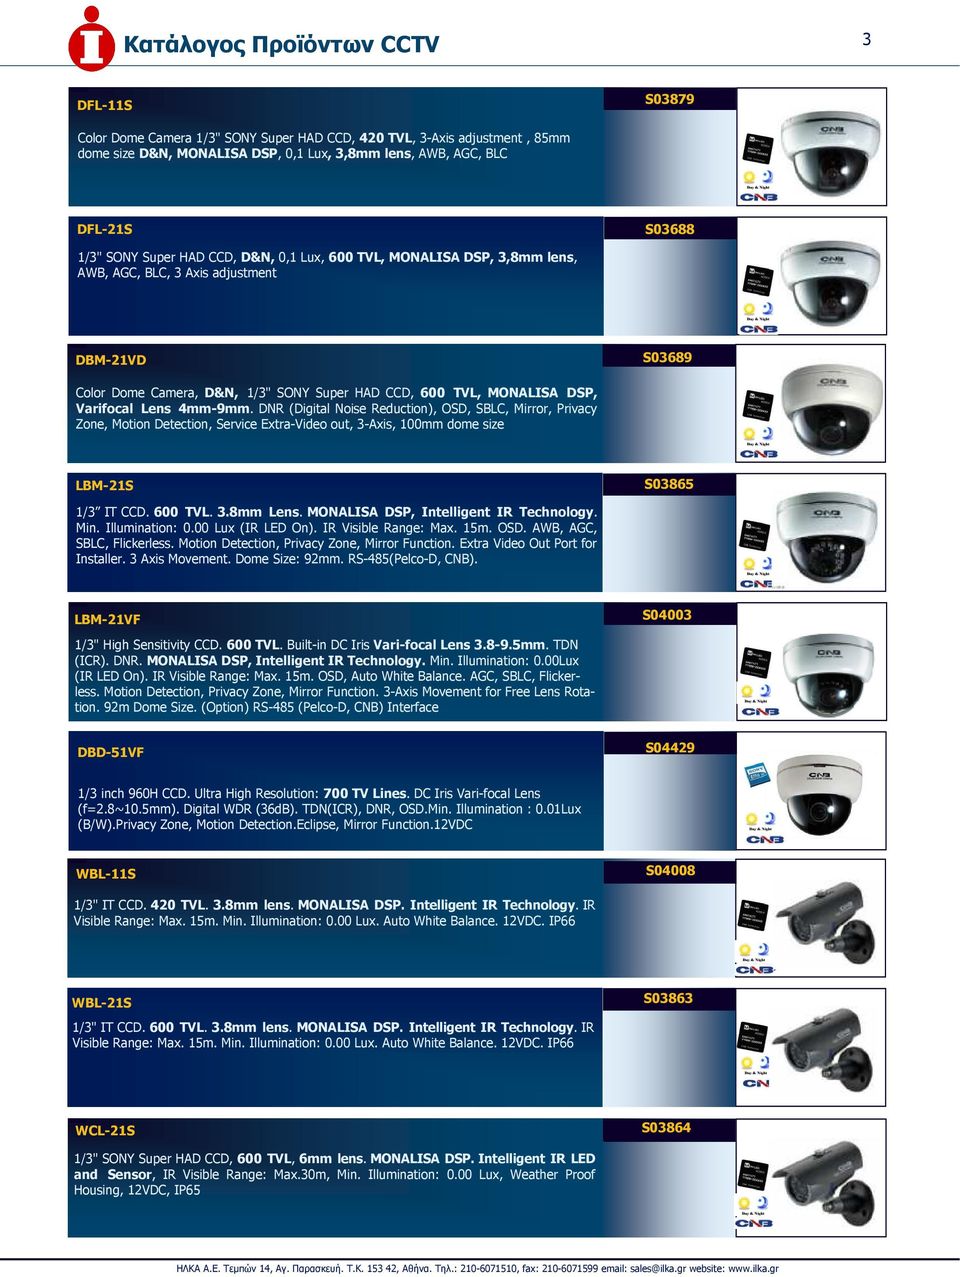 Varifocal Lens 4mm-9mm. DNR (Digital Noise Reduction), OSD, SBLC, Mirror, Privacy Zone, Motion Detection, Service Extra-Video out, 3-Axis, 100mm dome size LBM-21S S03865 1/3 IT CCD. 600 TVL. 3.8mm Lens.